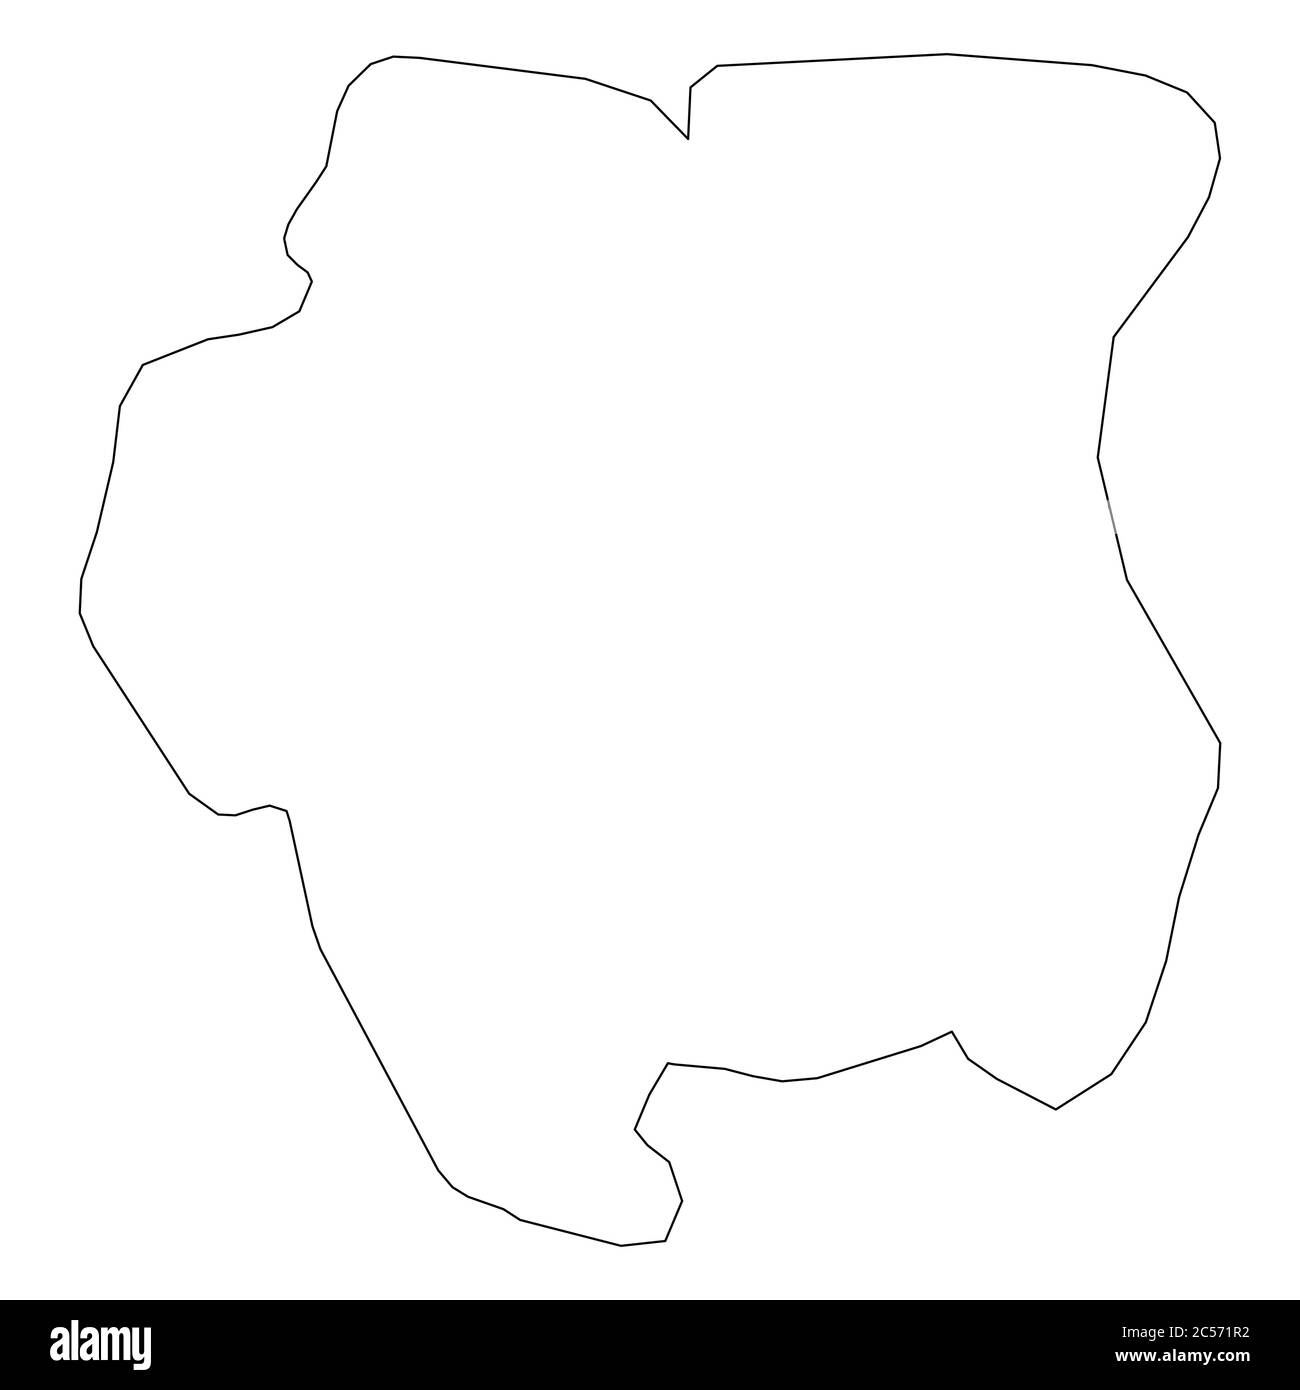 Surinam Solid Black Outline Border Map Of Country Area Simple Flat Vector Illustration Stock 0789